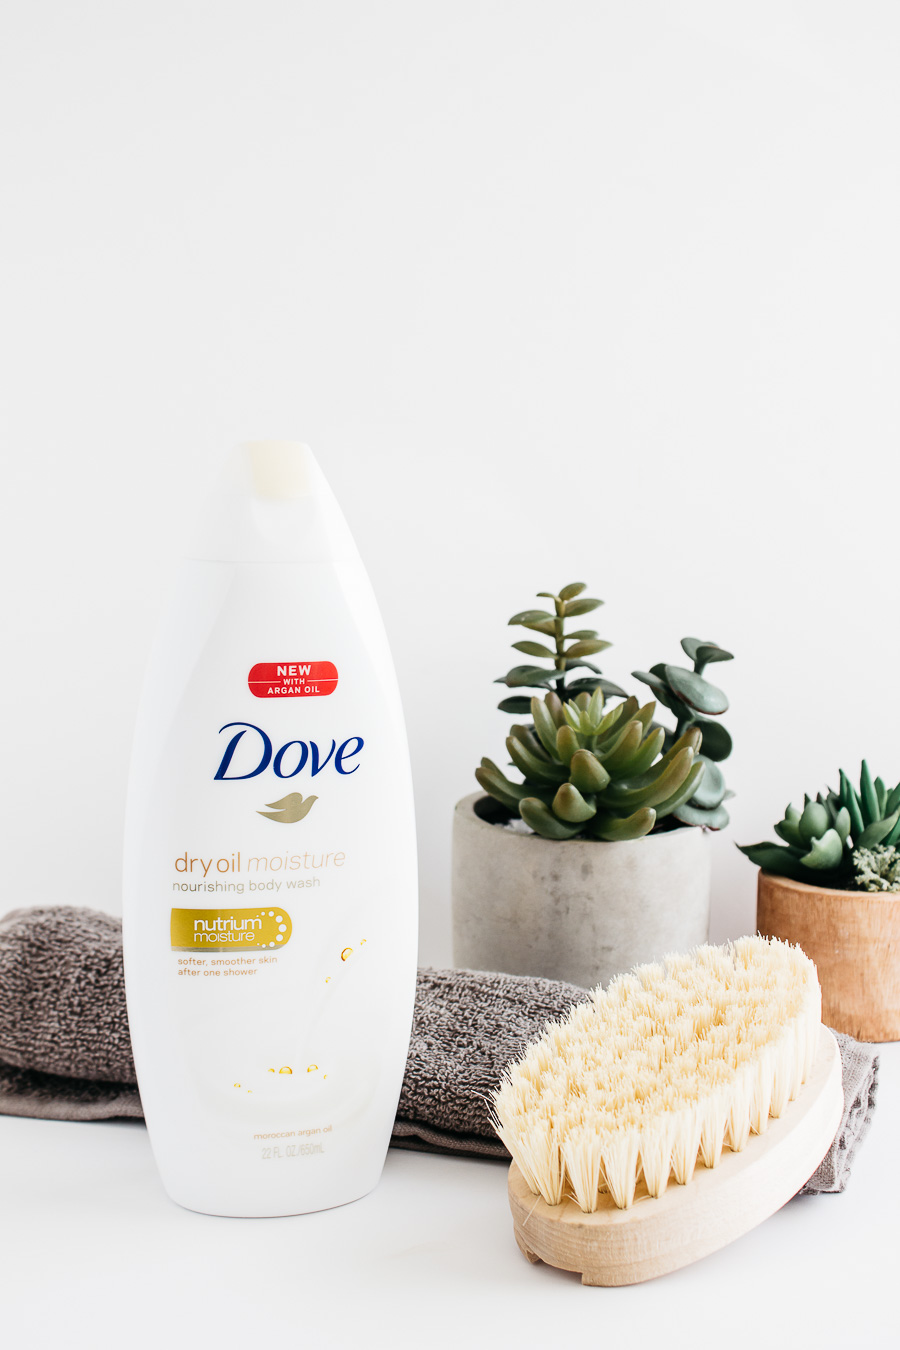 Dove-Body-Wash3 6 Best-Selling Women's Beauty Products in 2020